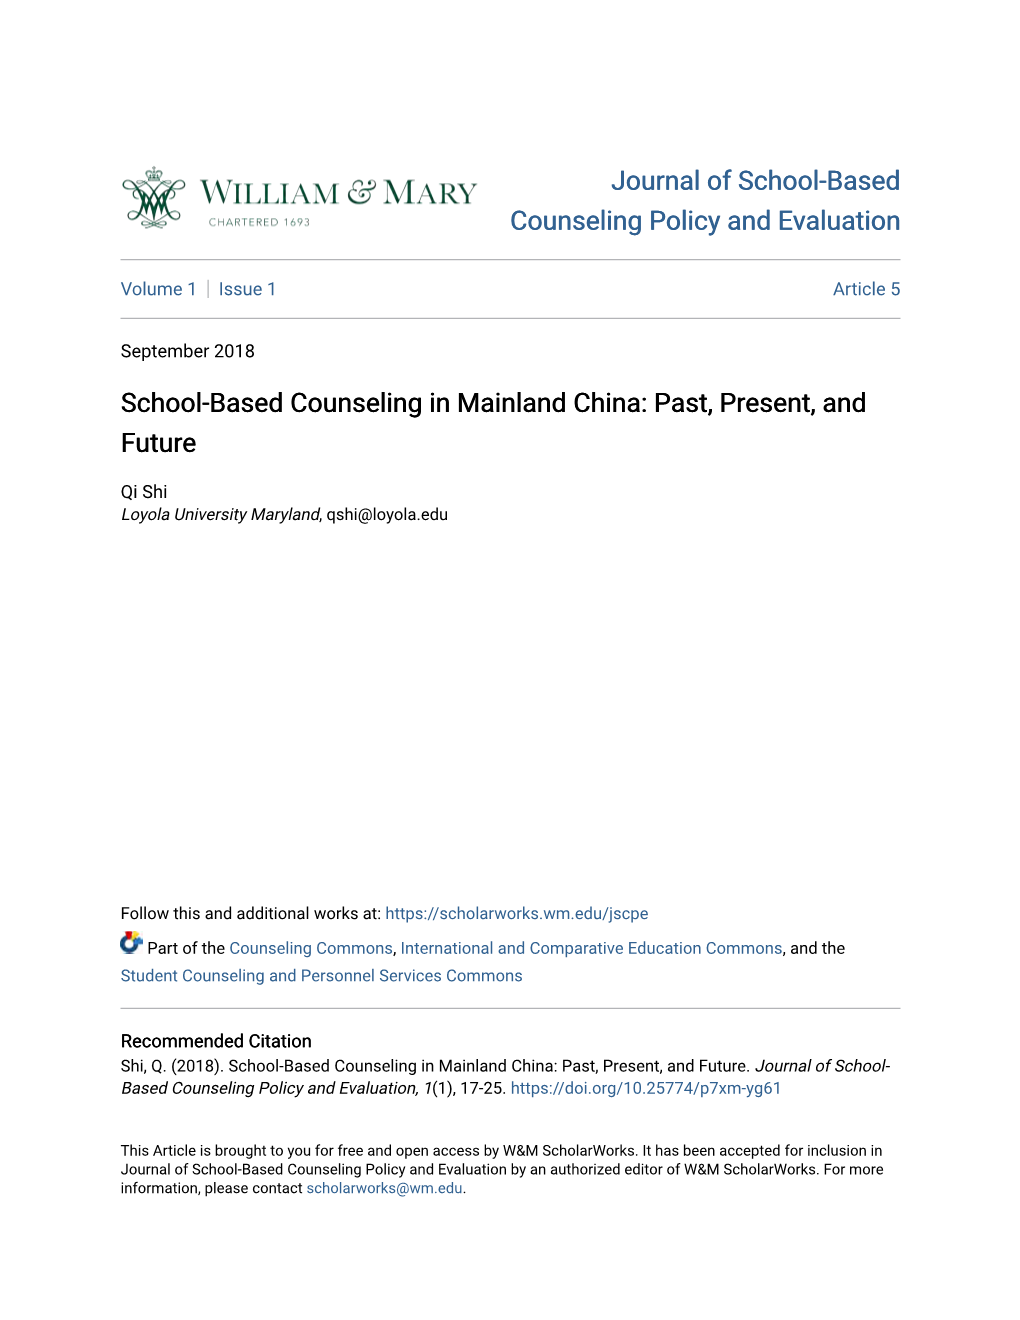 School-Based Counseling in Mainland China: Past, Present, and Future